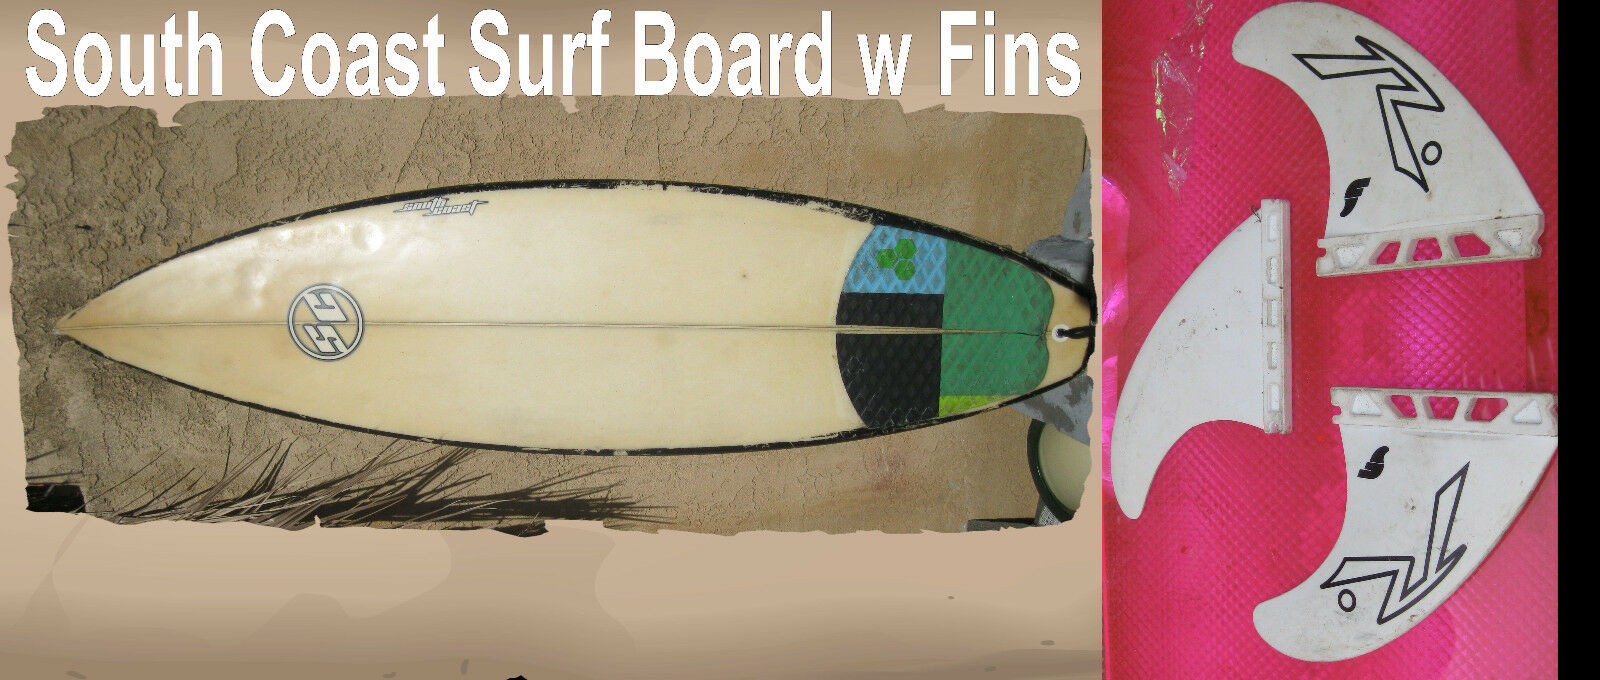 South Coast Vintage Southern California Surfboard w Fins Signed Autographed